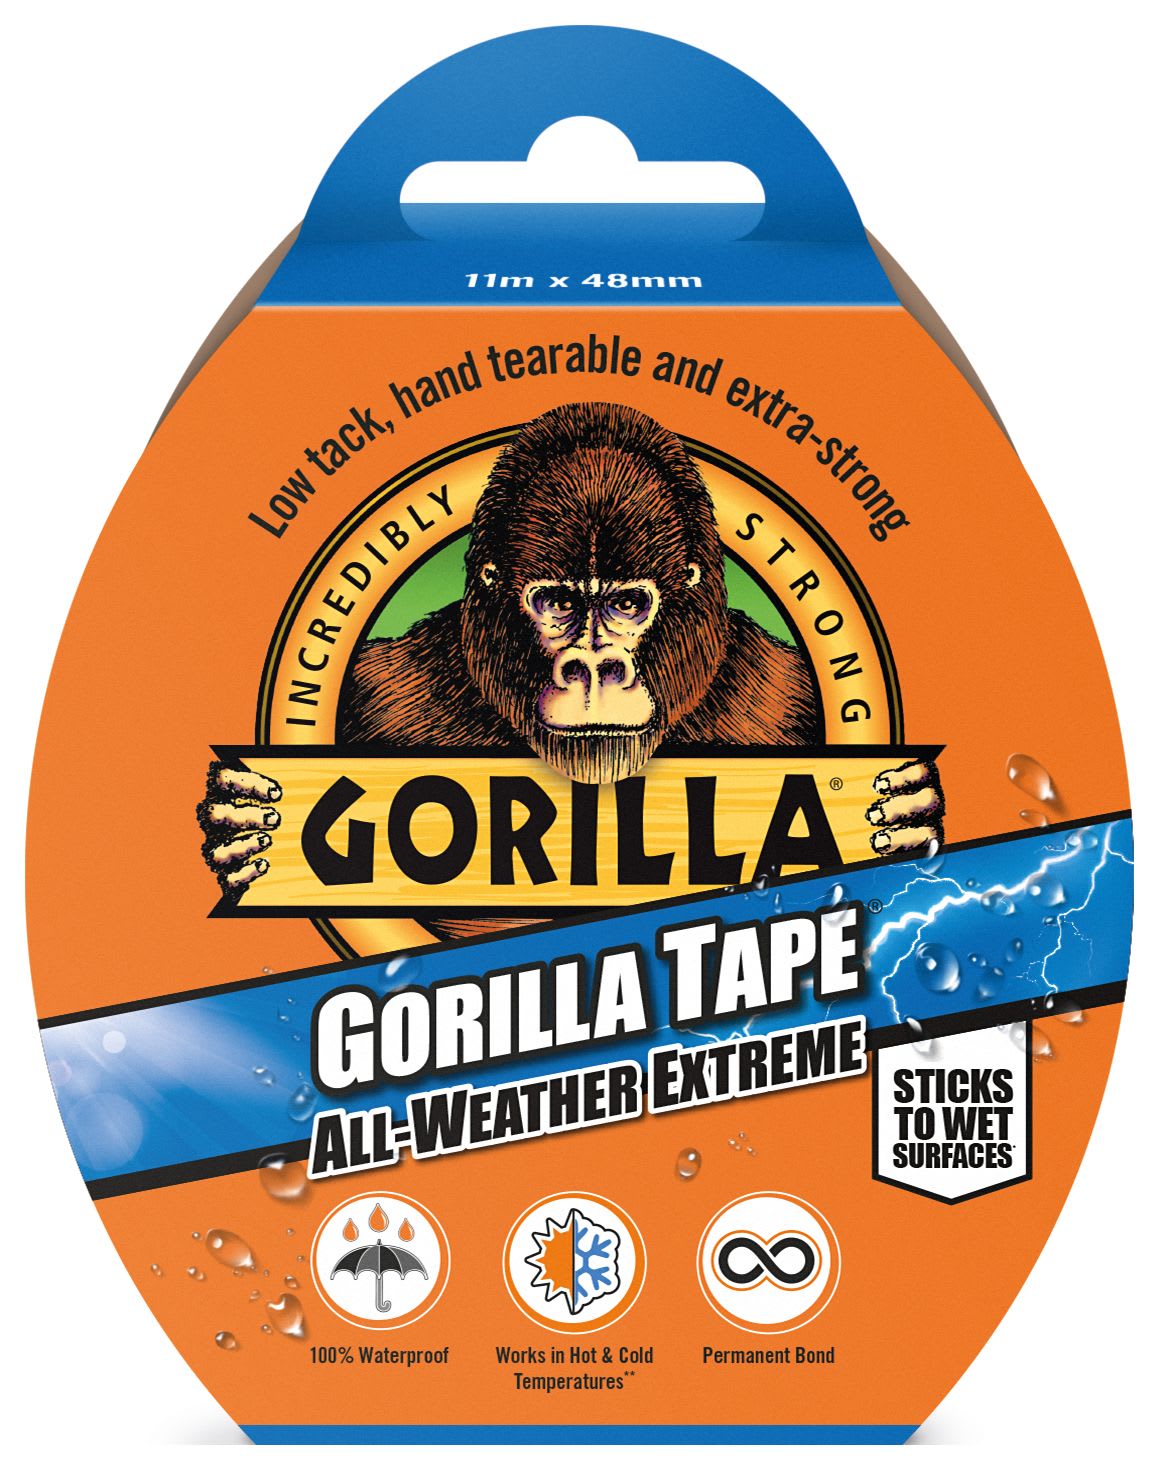 Gorilla All Weather Extreme Tape Wickes.co.uk